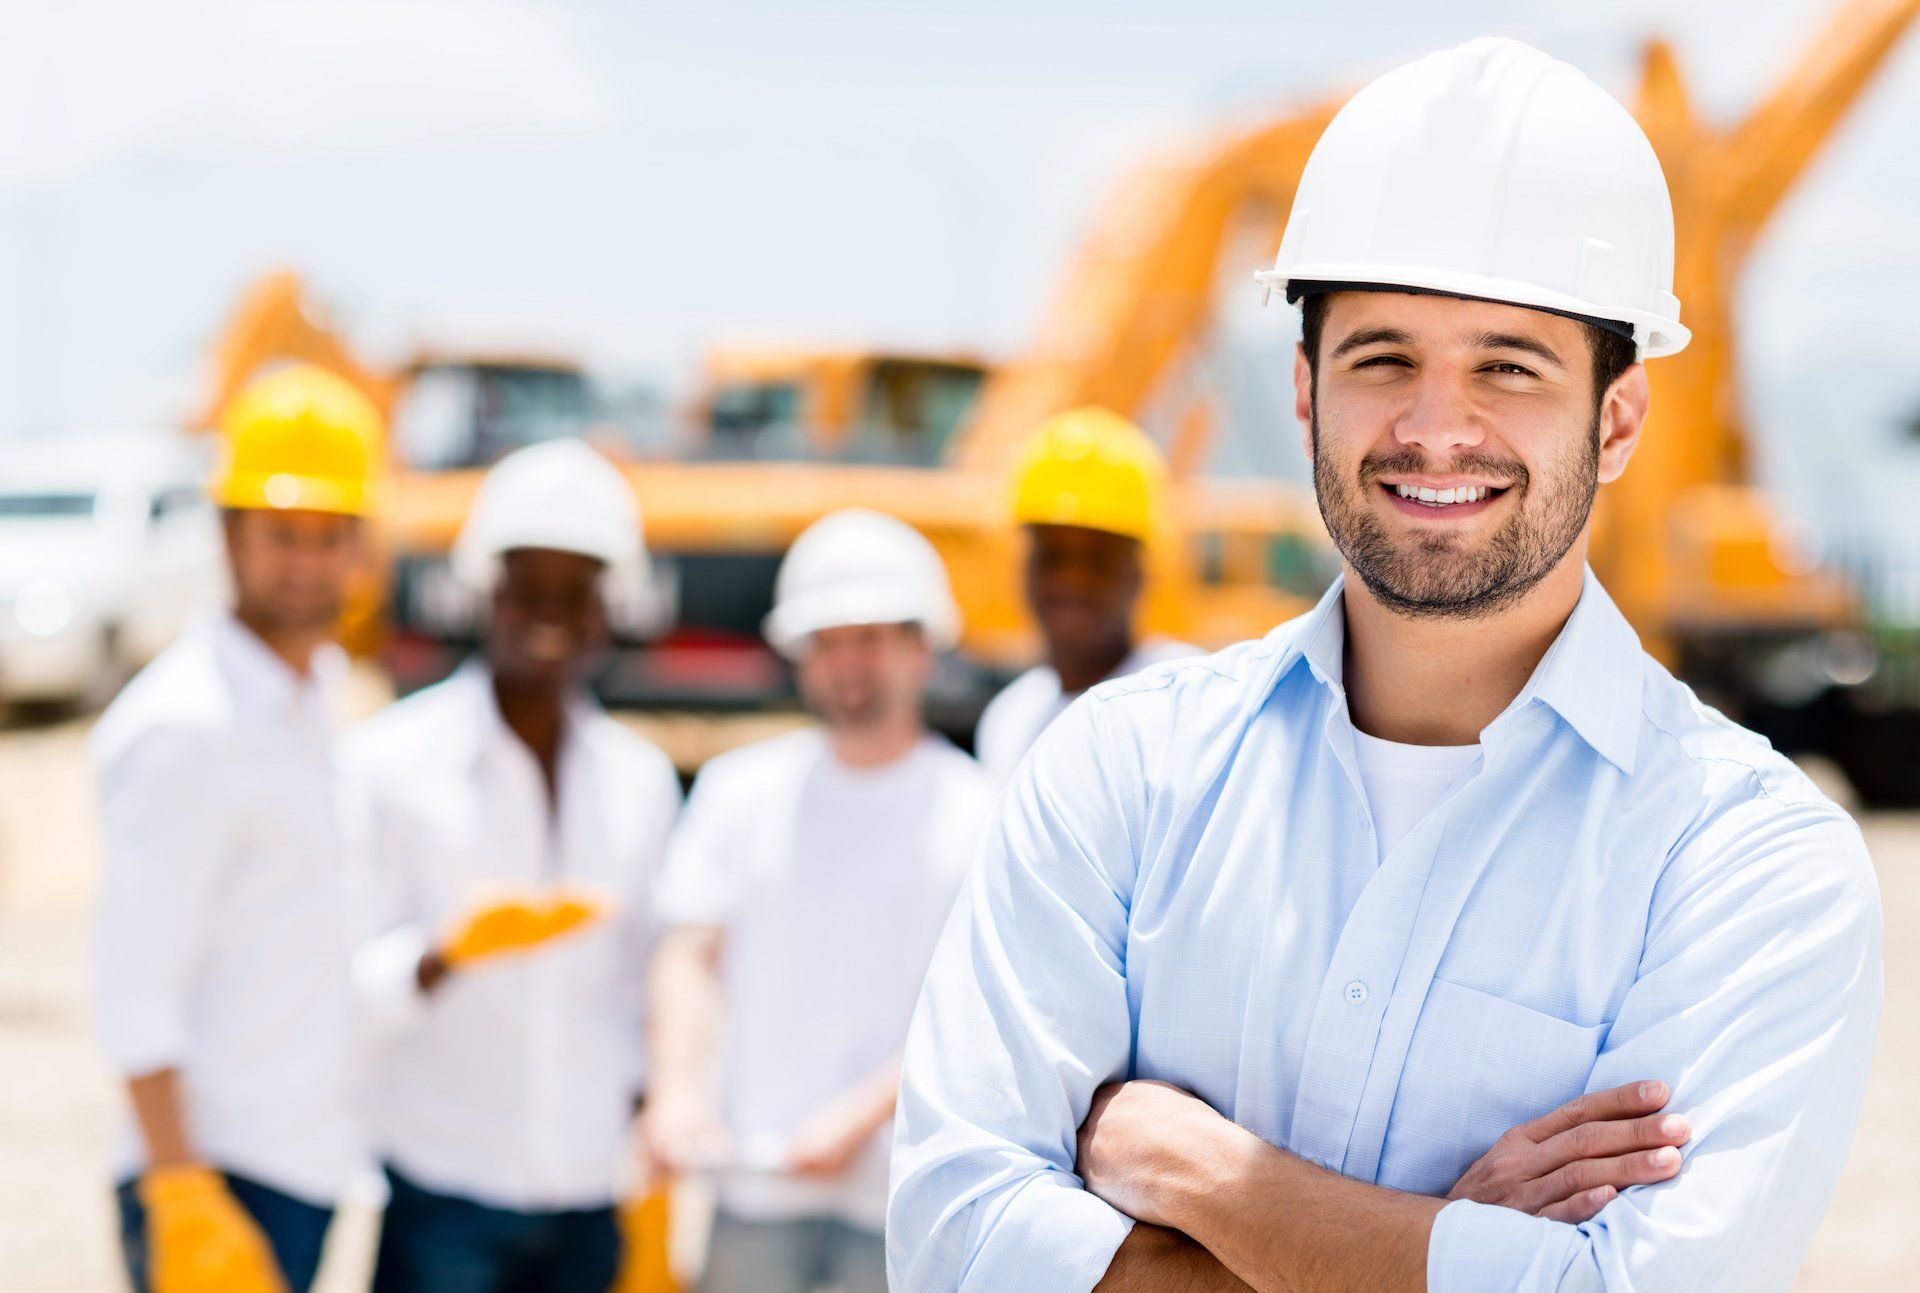 A man wearing a hard hat is standing in front of a group of construction workers.